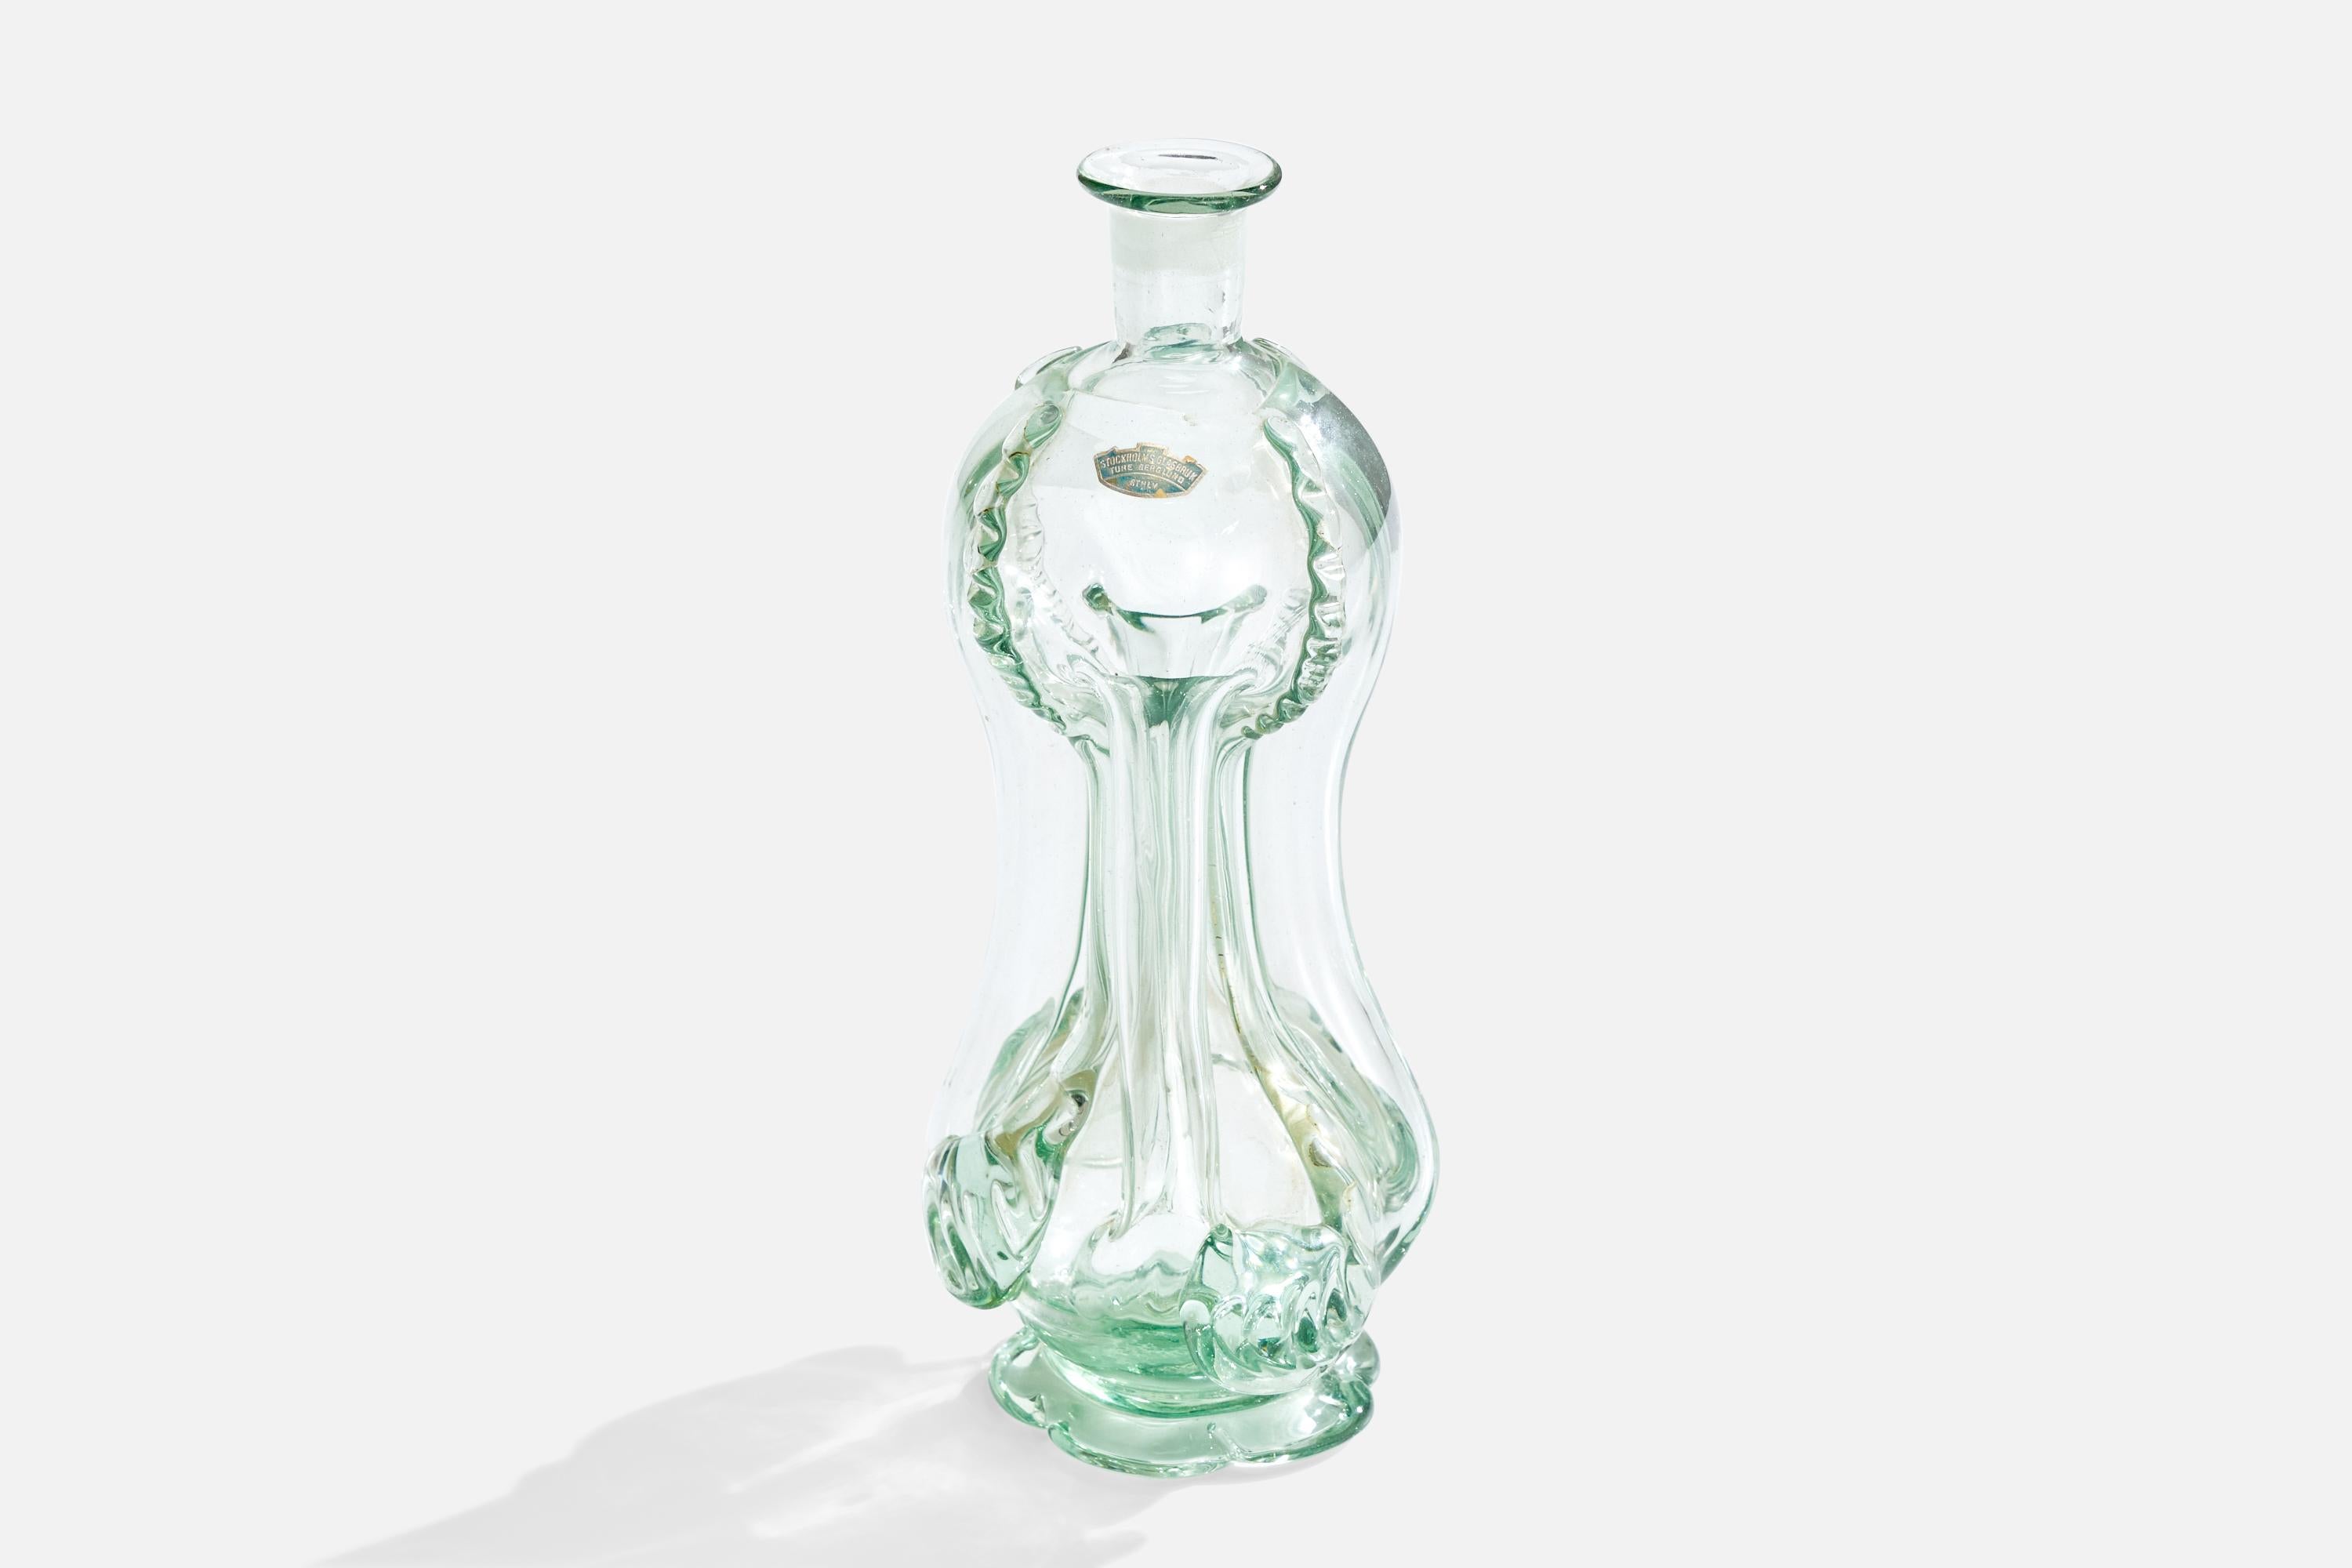 A blown glass bottle designed by Ture Berglund and produced by Skansens Glasbruk, Sweden, 1940s.